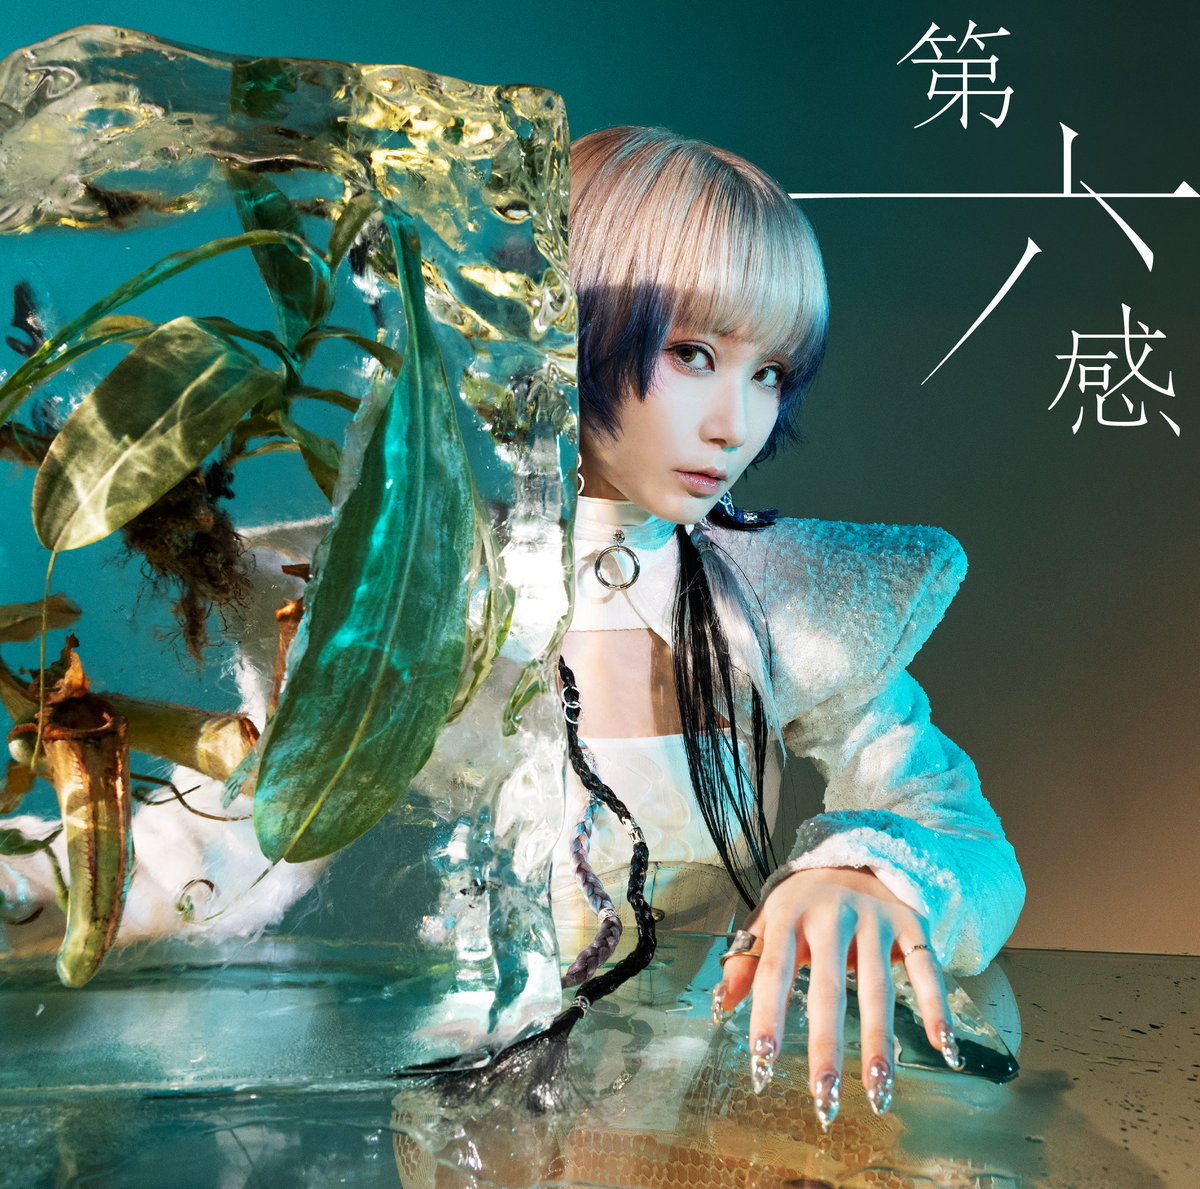 Cover art for『Reol - Nd60』from the release『THE SIXTH SENSE